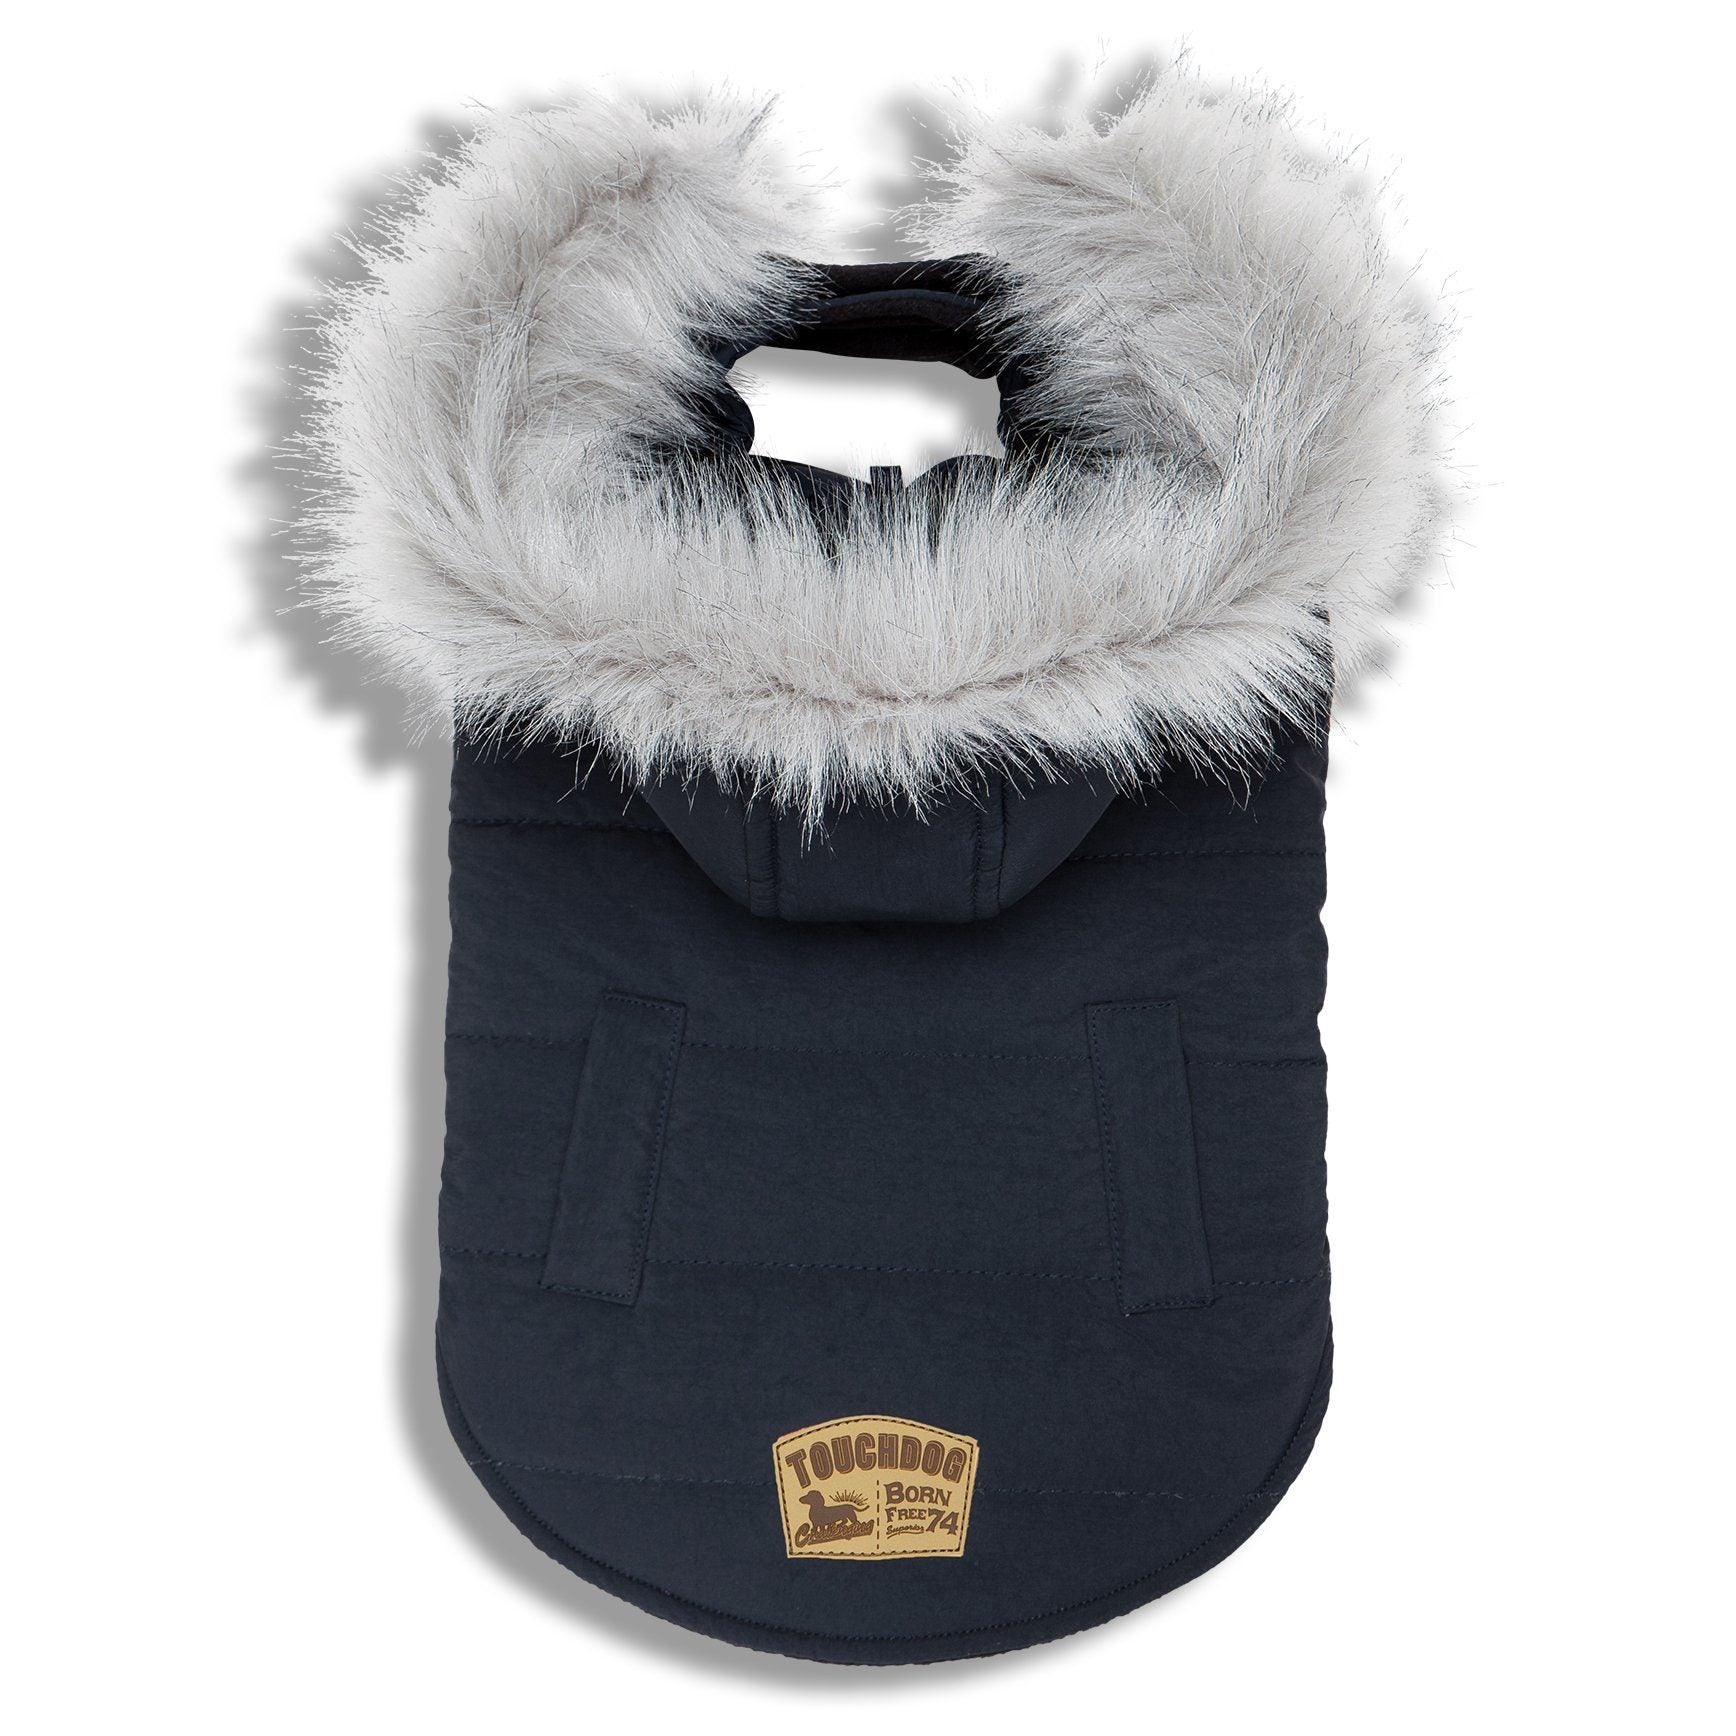 Touchdog 'Eskimo-Swag' Duck-Down Insulated Winter Dog Coat Parka X-Small Navy